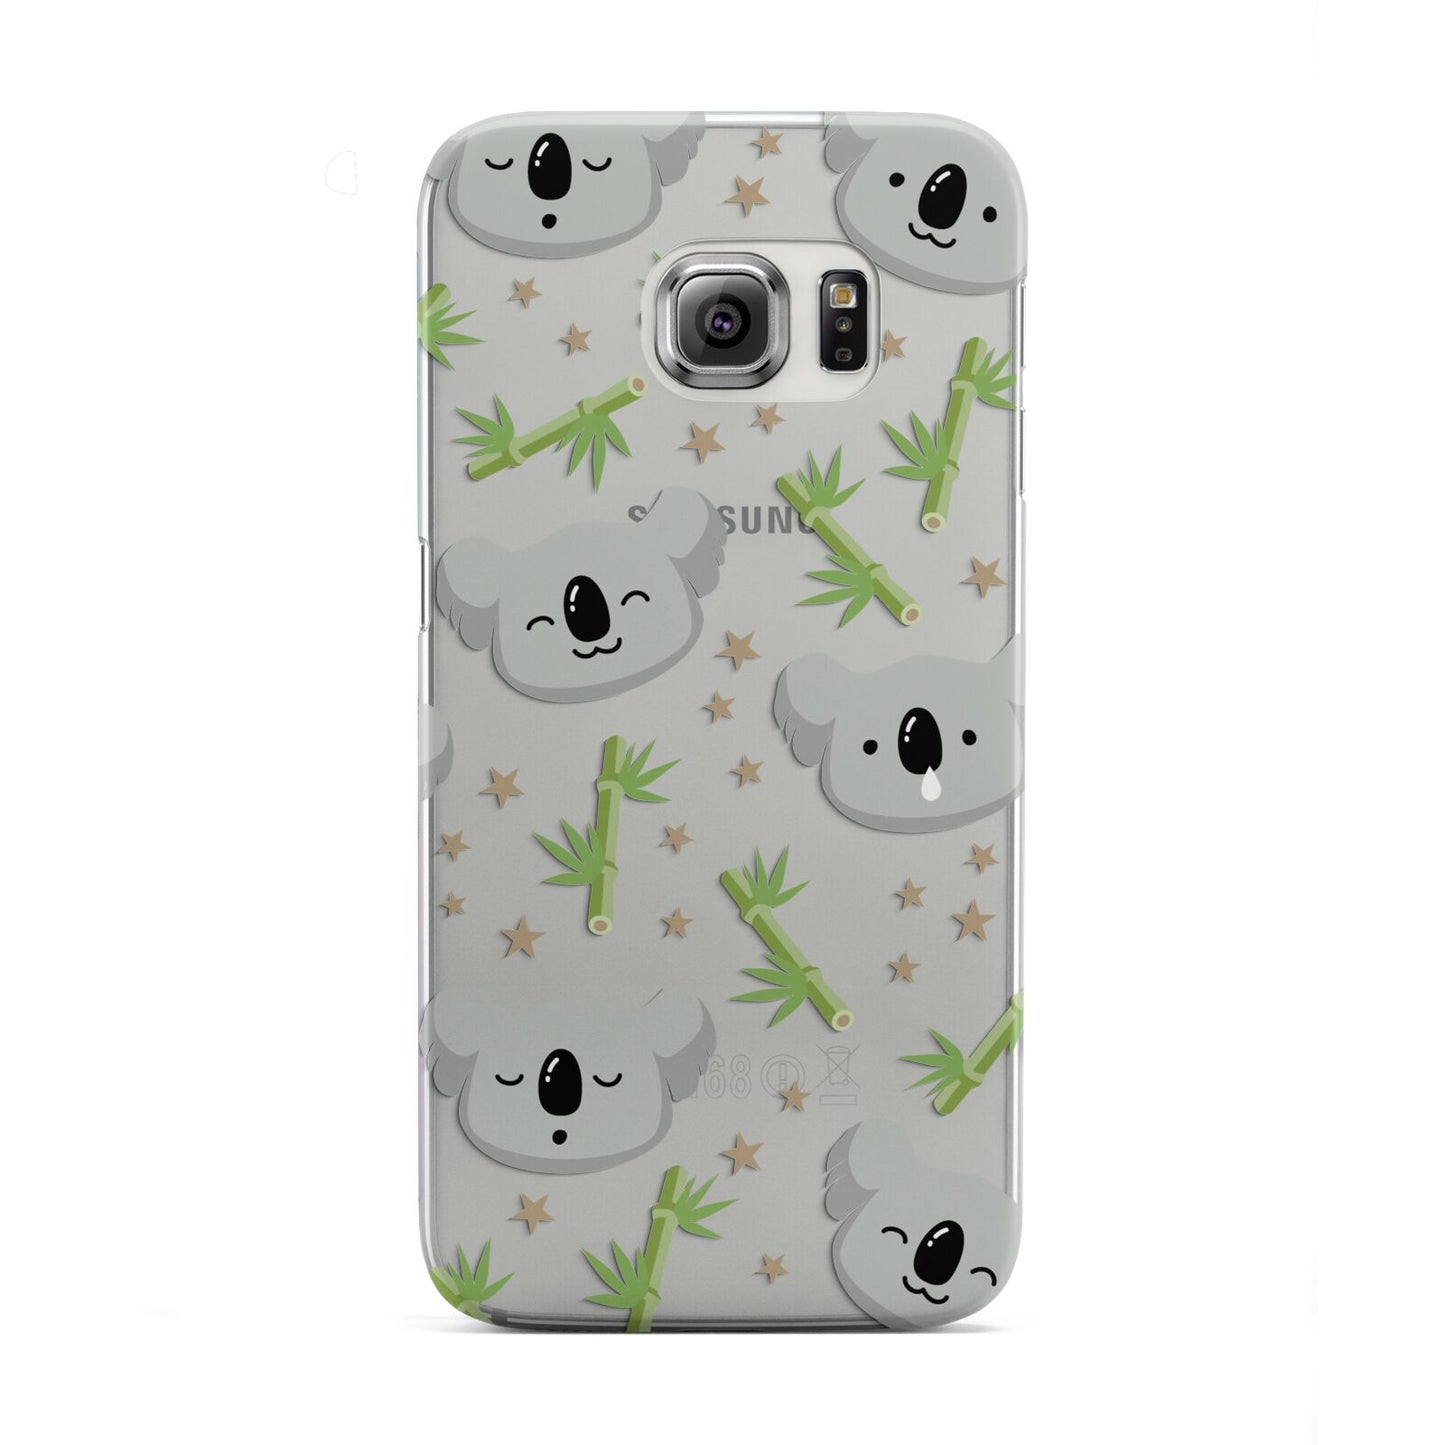 Koala Faces with Transparent Background Samsung Galaxy S6 Edge Case